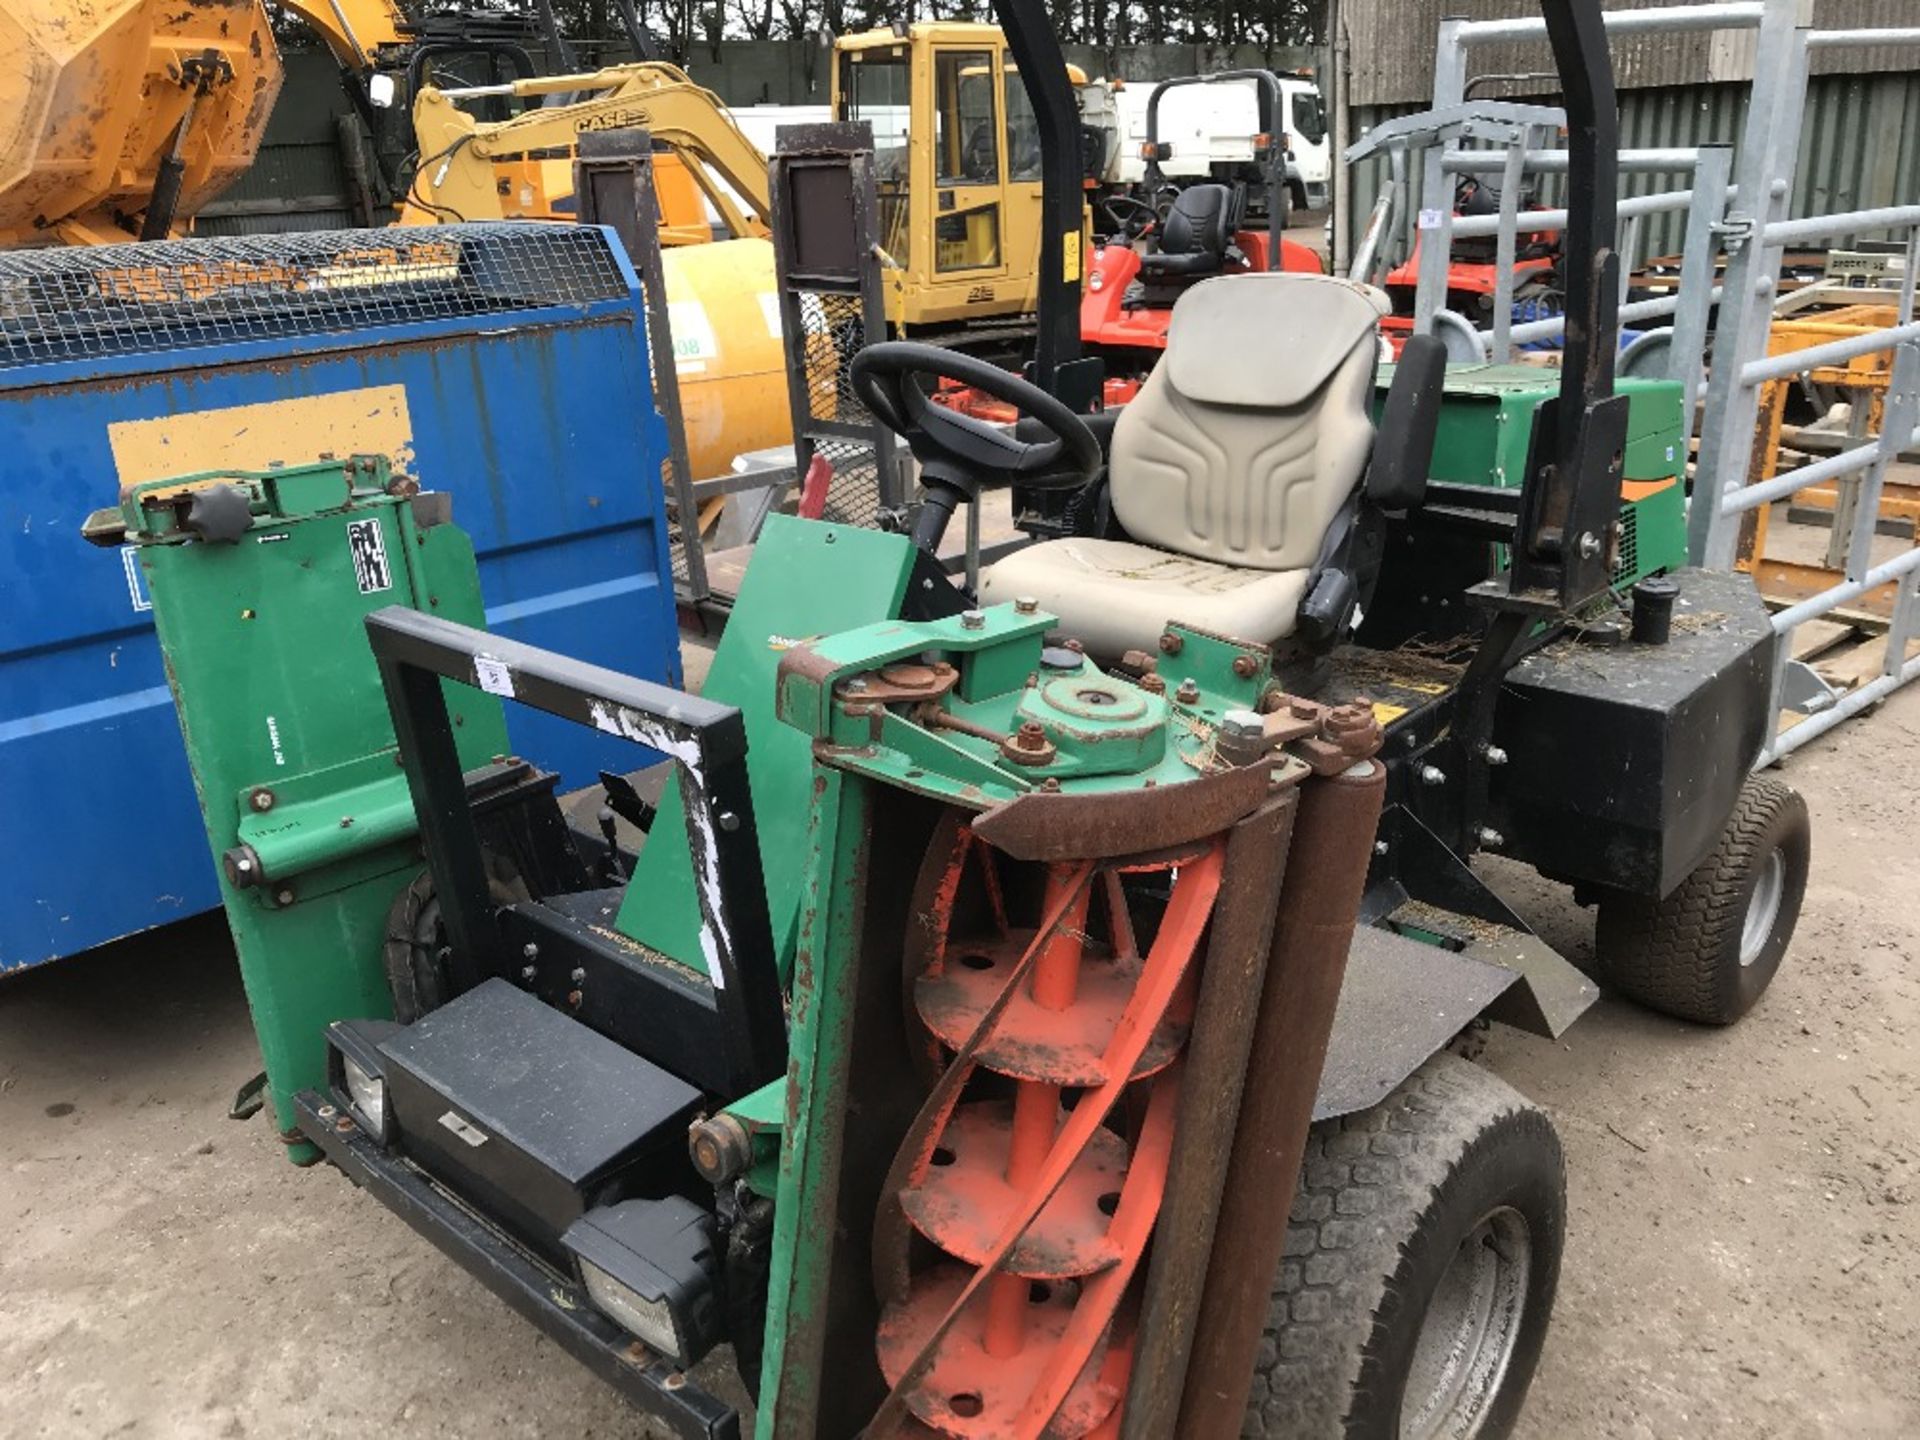 Ransomes 4wd triple ride on mower when tested was seen to start, drive steer and brake